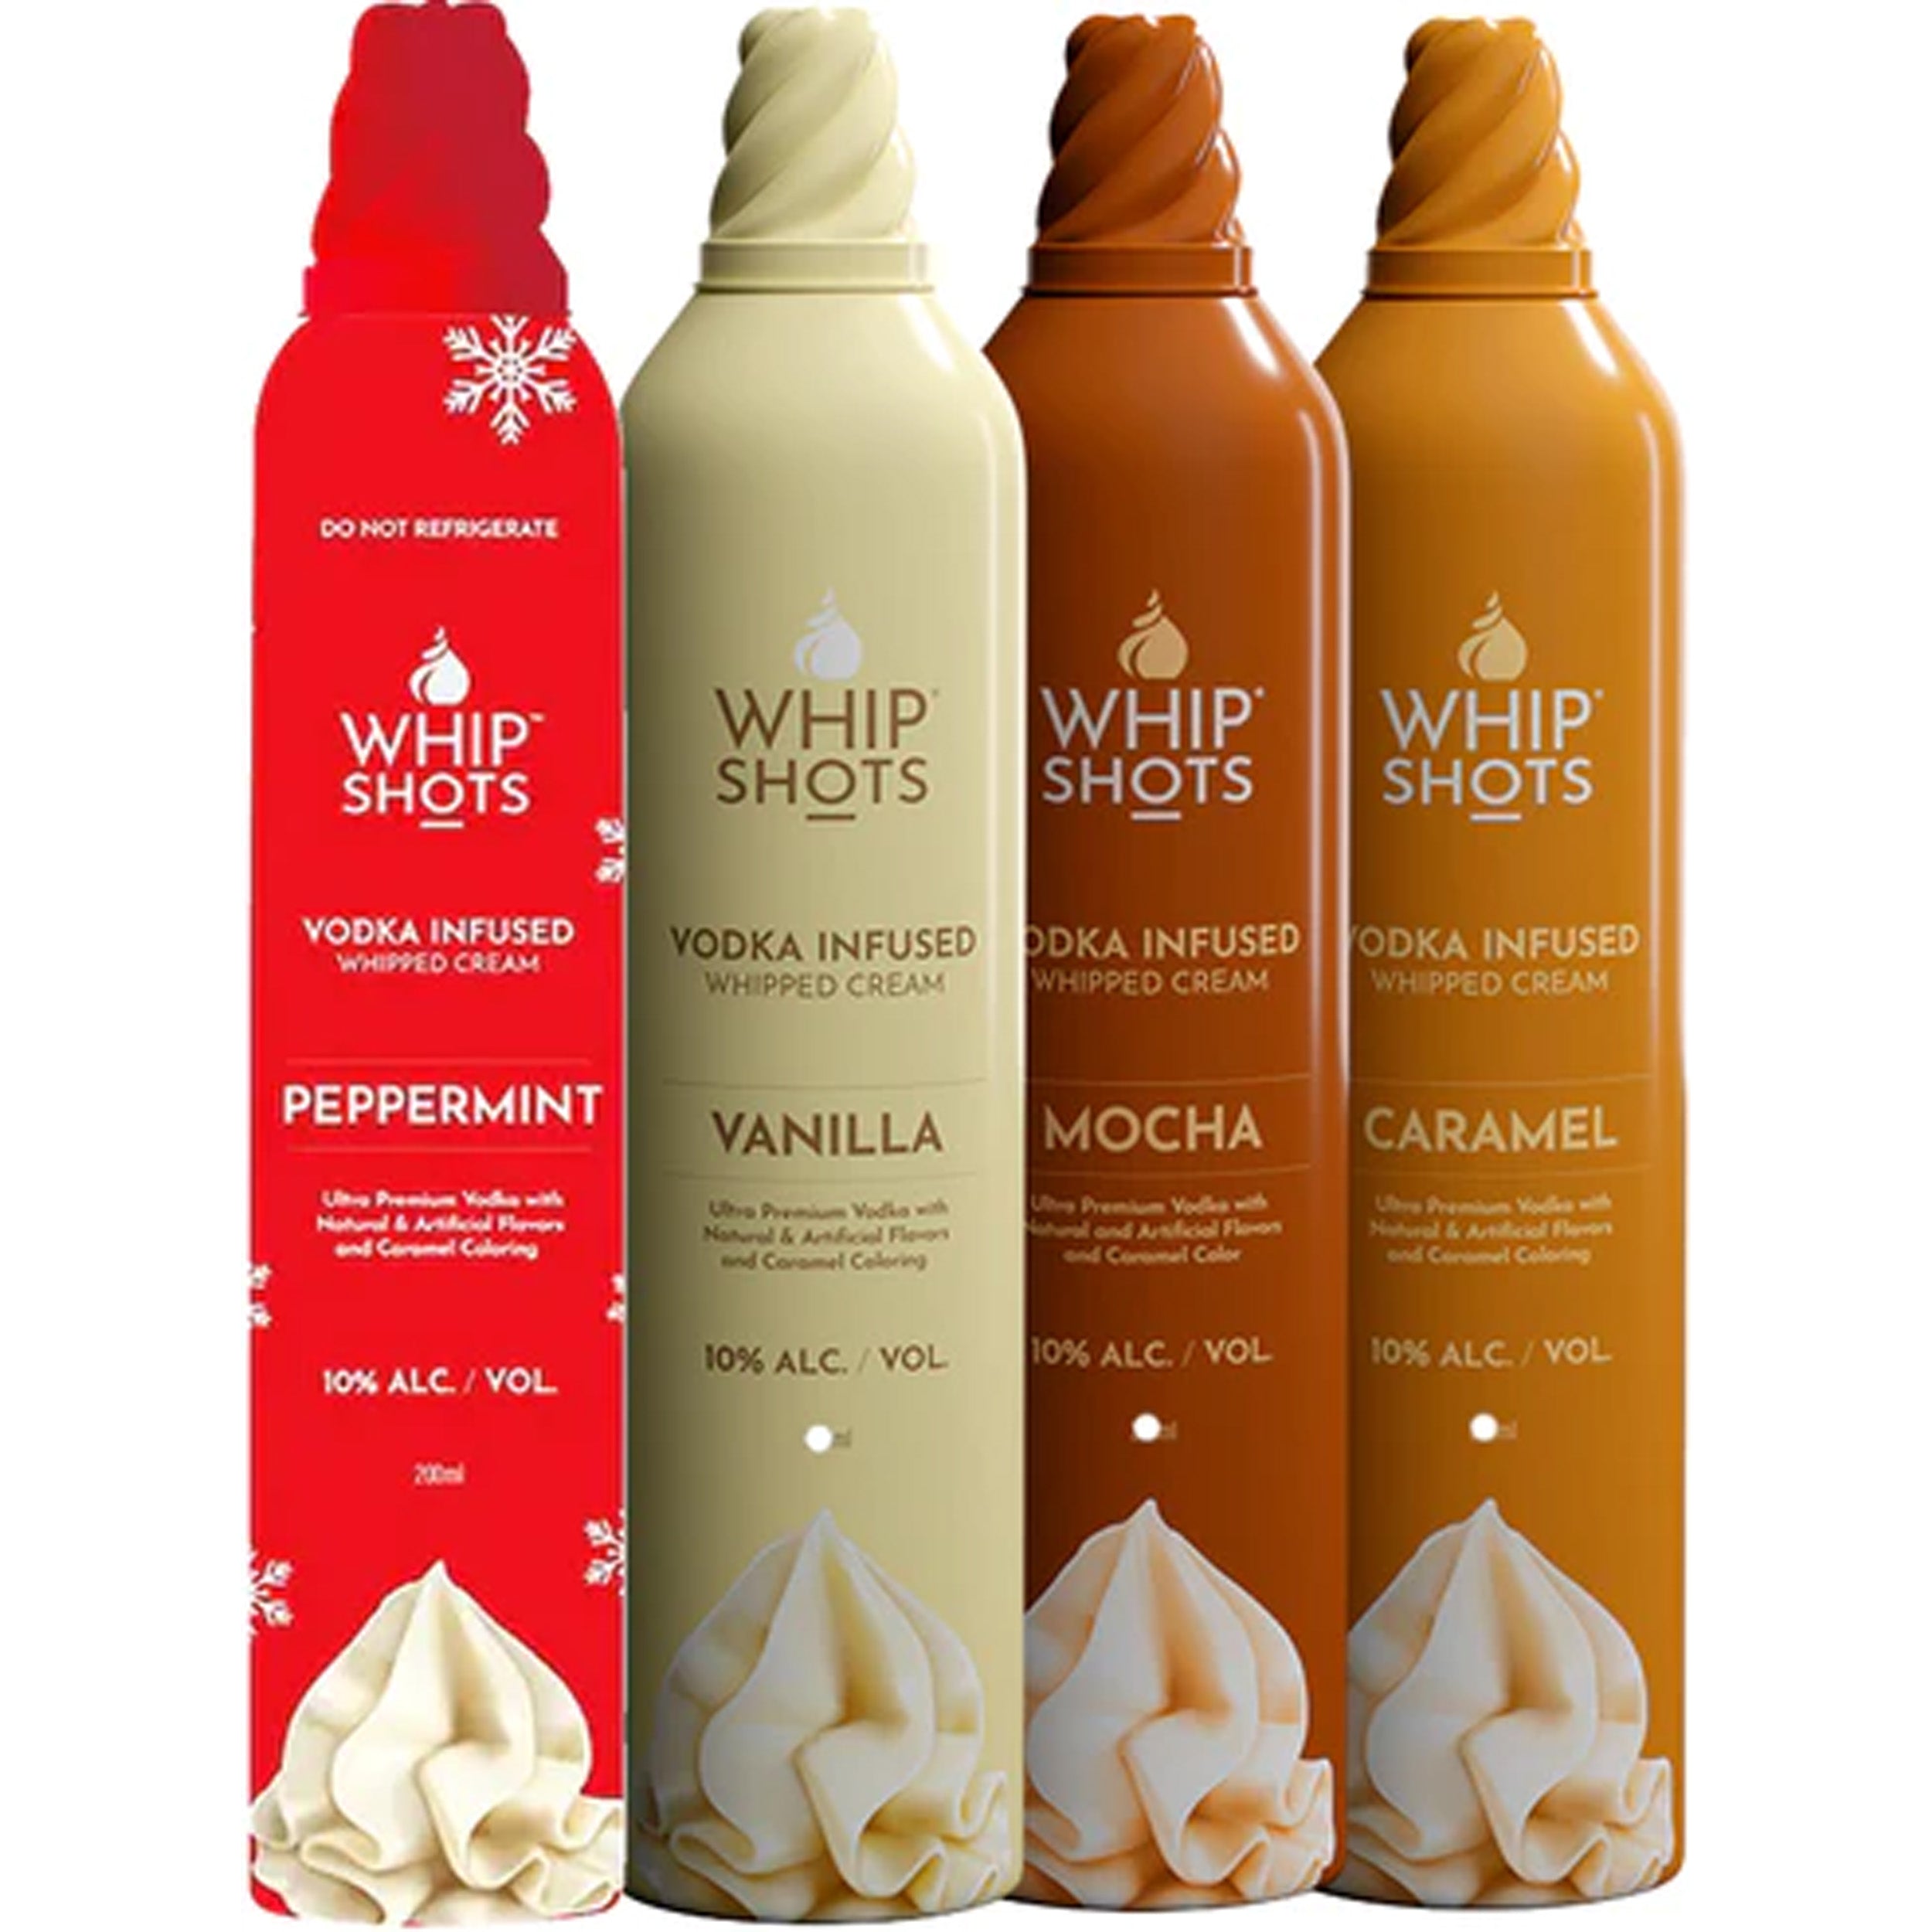 Whip Shots Vodka Infused Whipped Cream by Cardi B Bundle 200mL